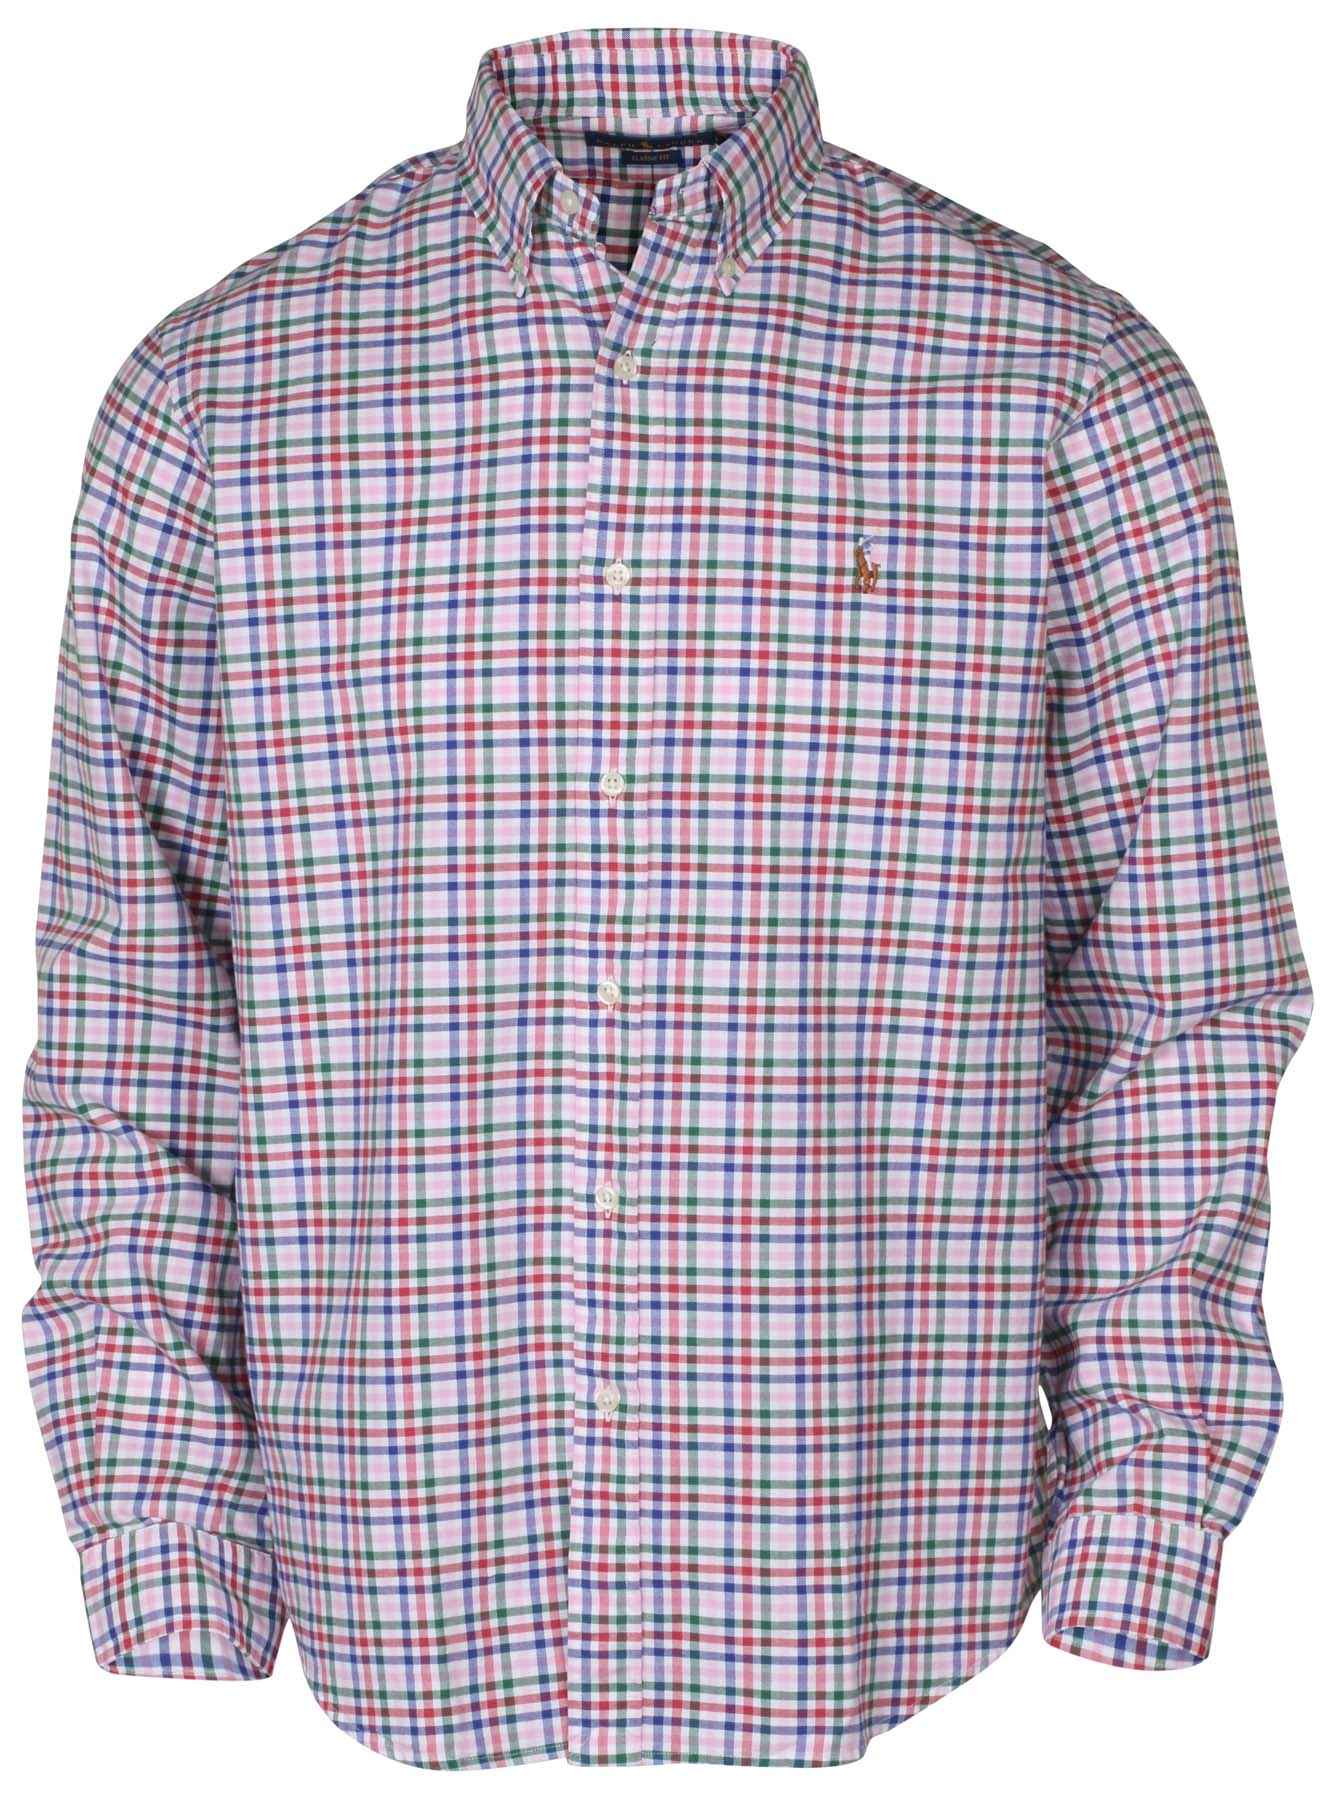 RL Men's Classic Fit Plaid Oxford Button Down Shirt (Small, Pink) - image 1 of 3